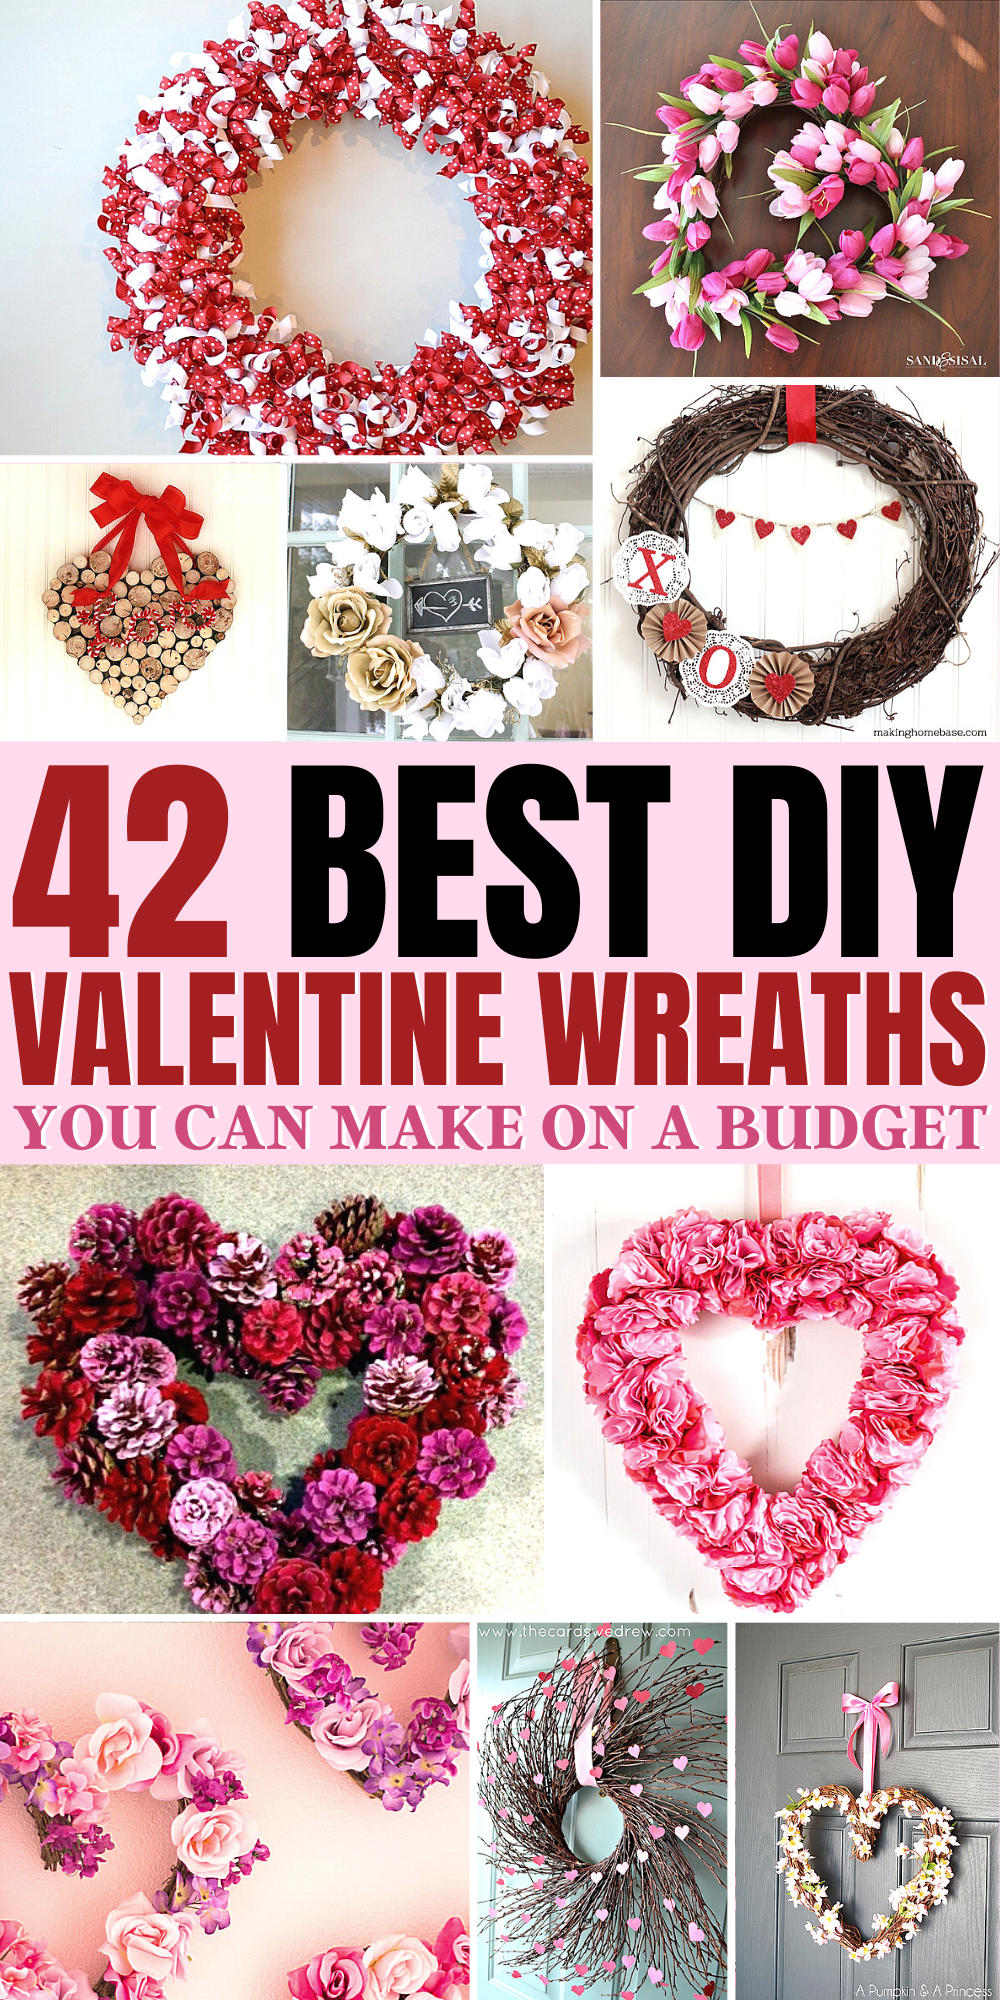 42 DIY Valentine Wreaths Ideas for your home. #valentinesday #valentinesdiy #valentineswreath